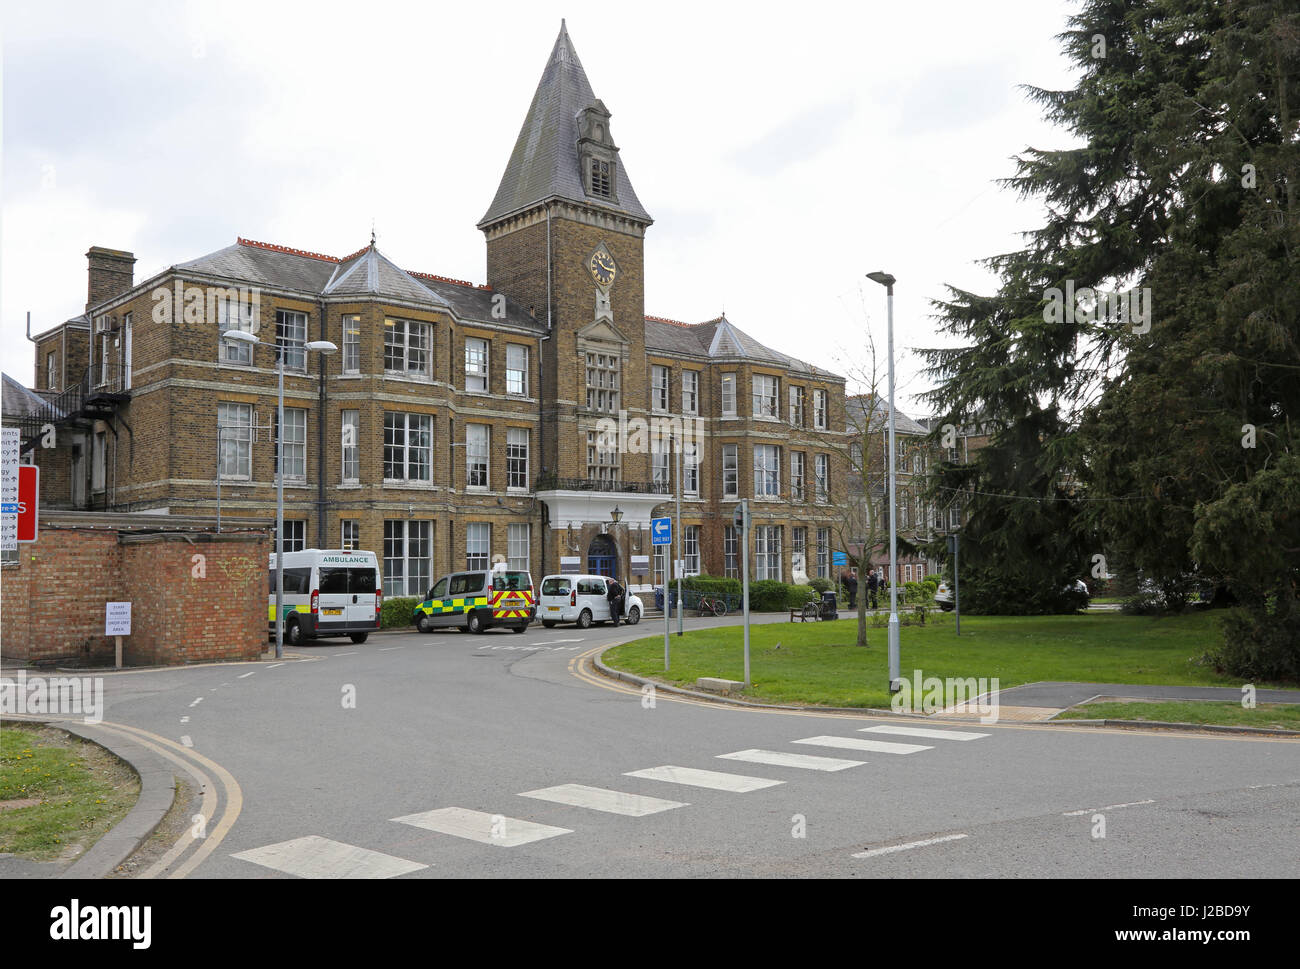 Main entrance to Chase Farm Hospital in Enfield, north London, UK. This original Victorian structure has been largely replaced by new buildings. Stock Photo